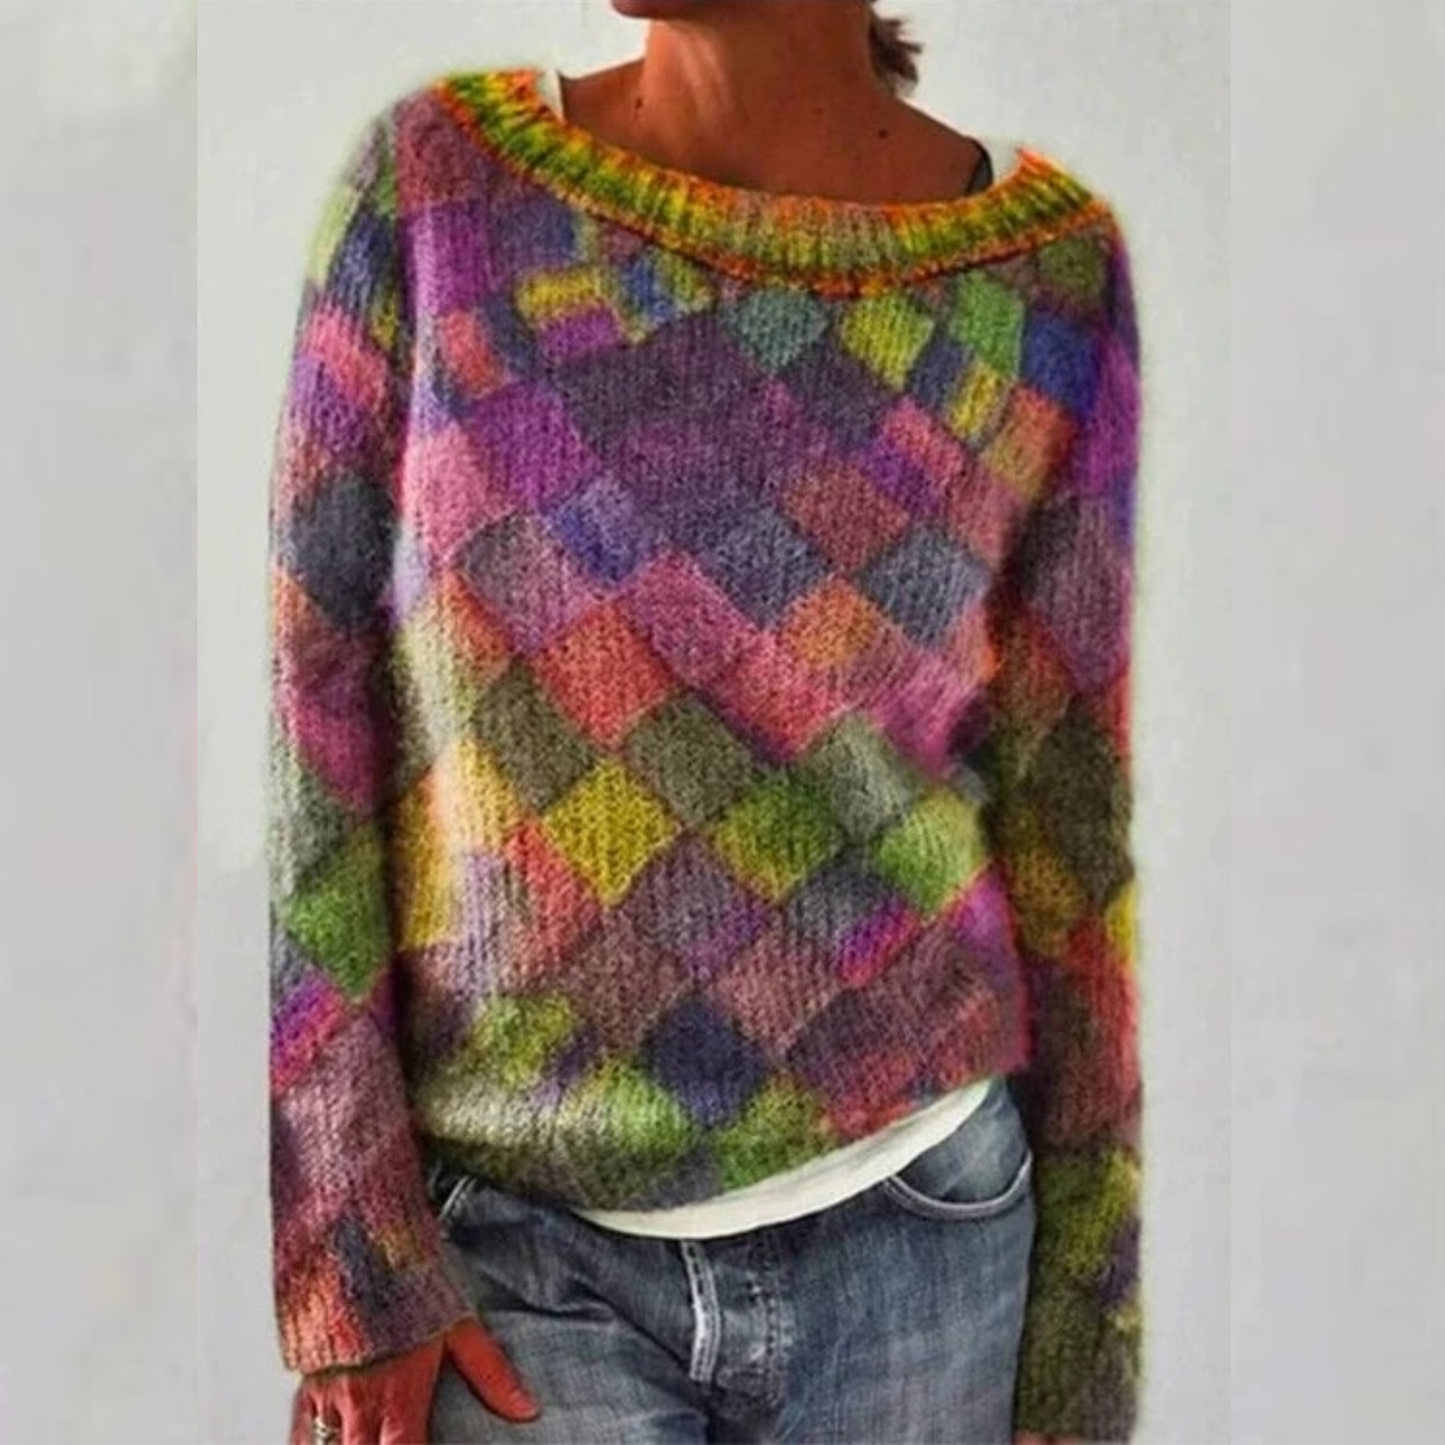 Fashionable knitted sweater